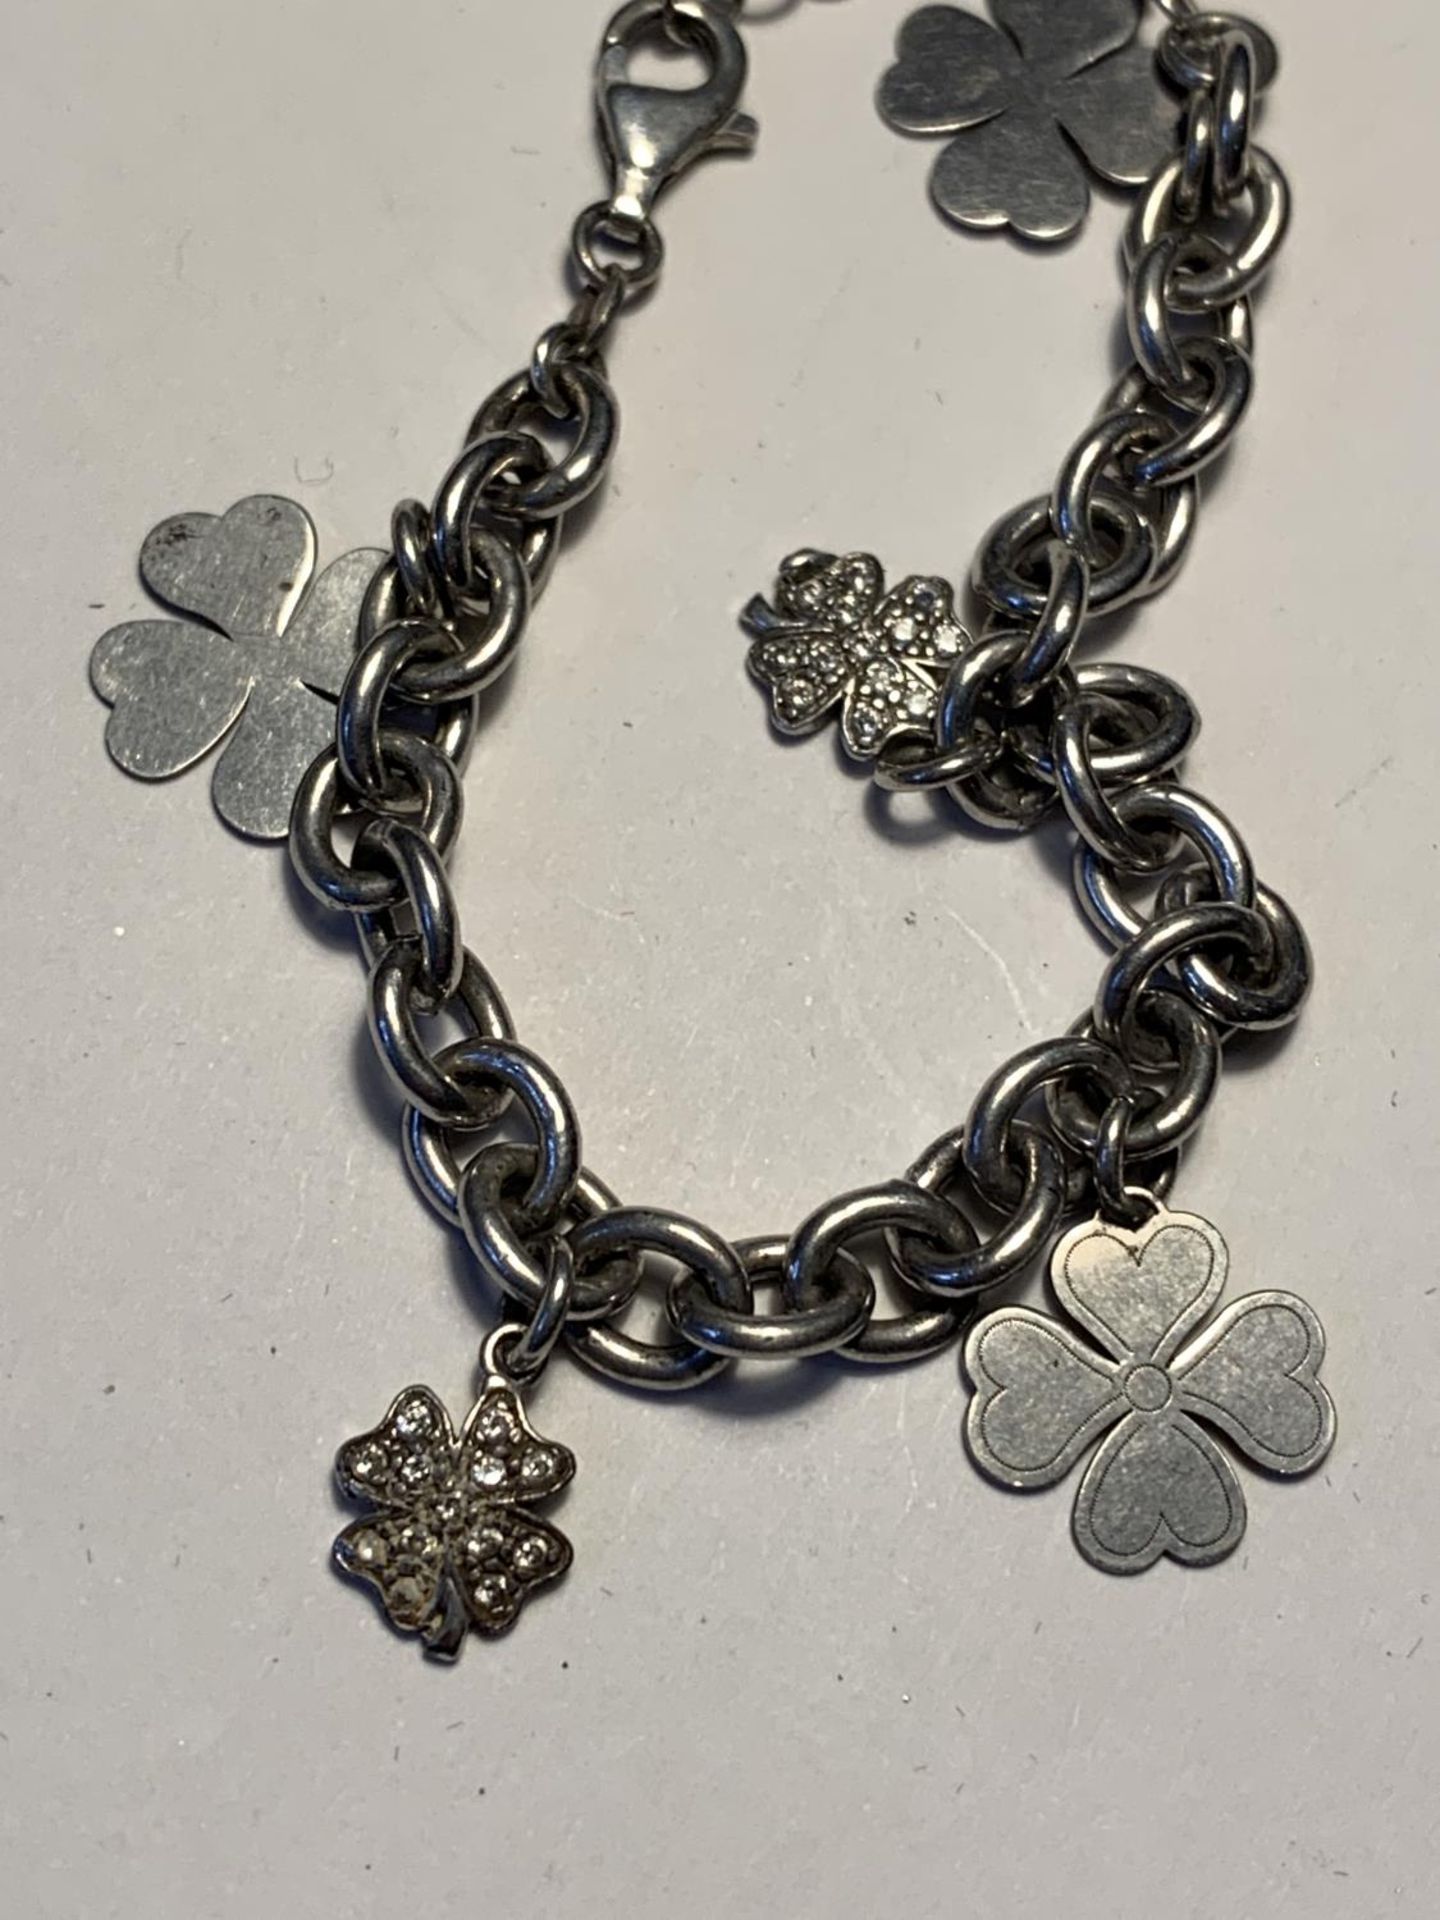 TWO SILVER BRACELETS WITH CHARMS - Image 2 of 3